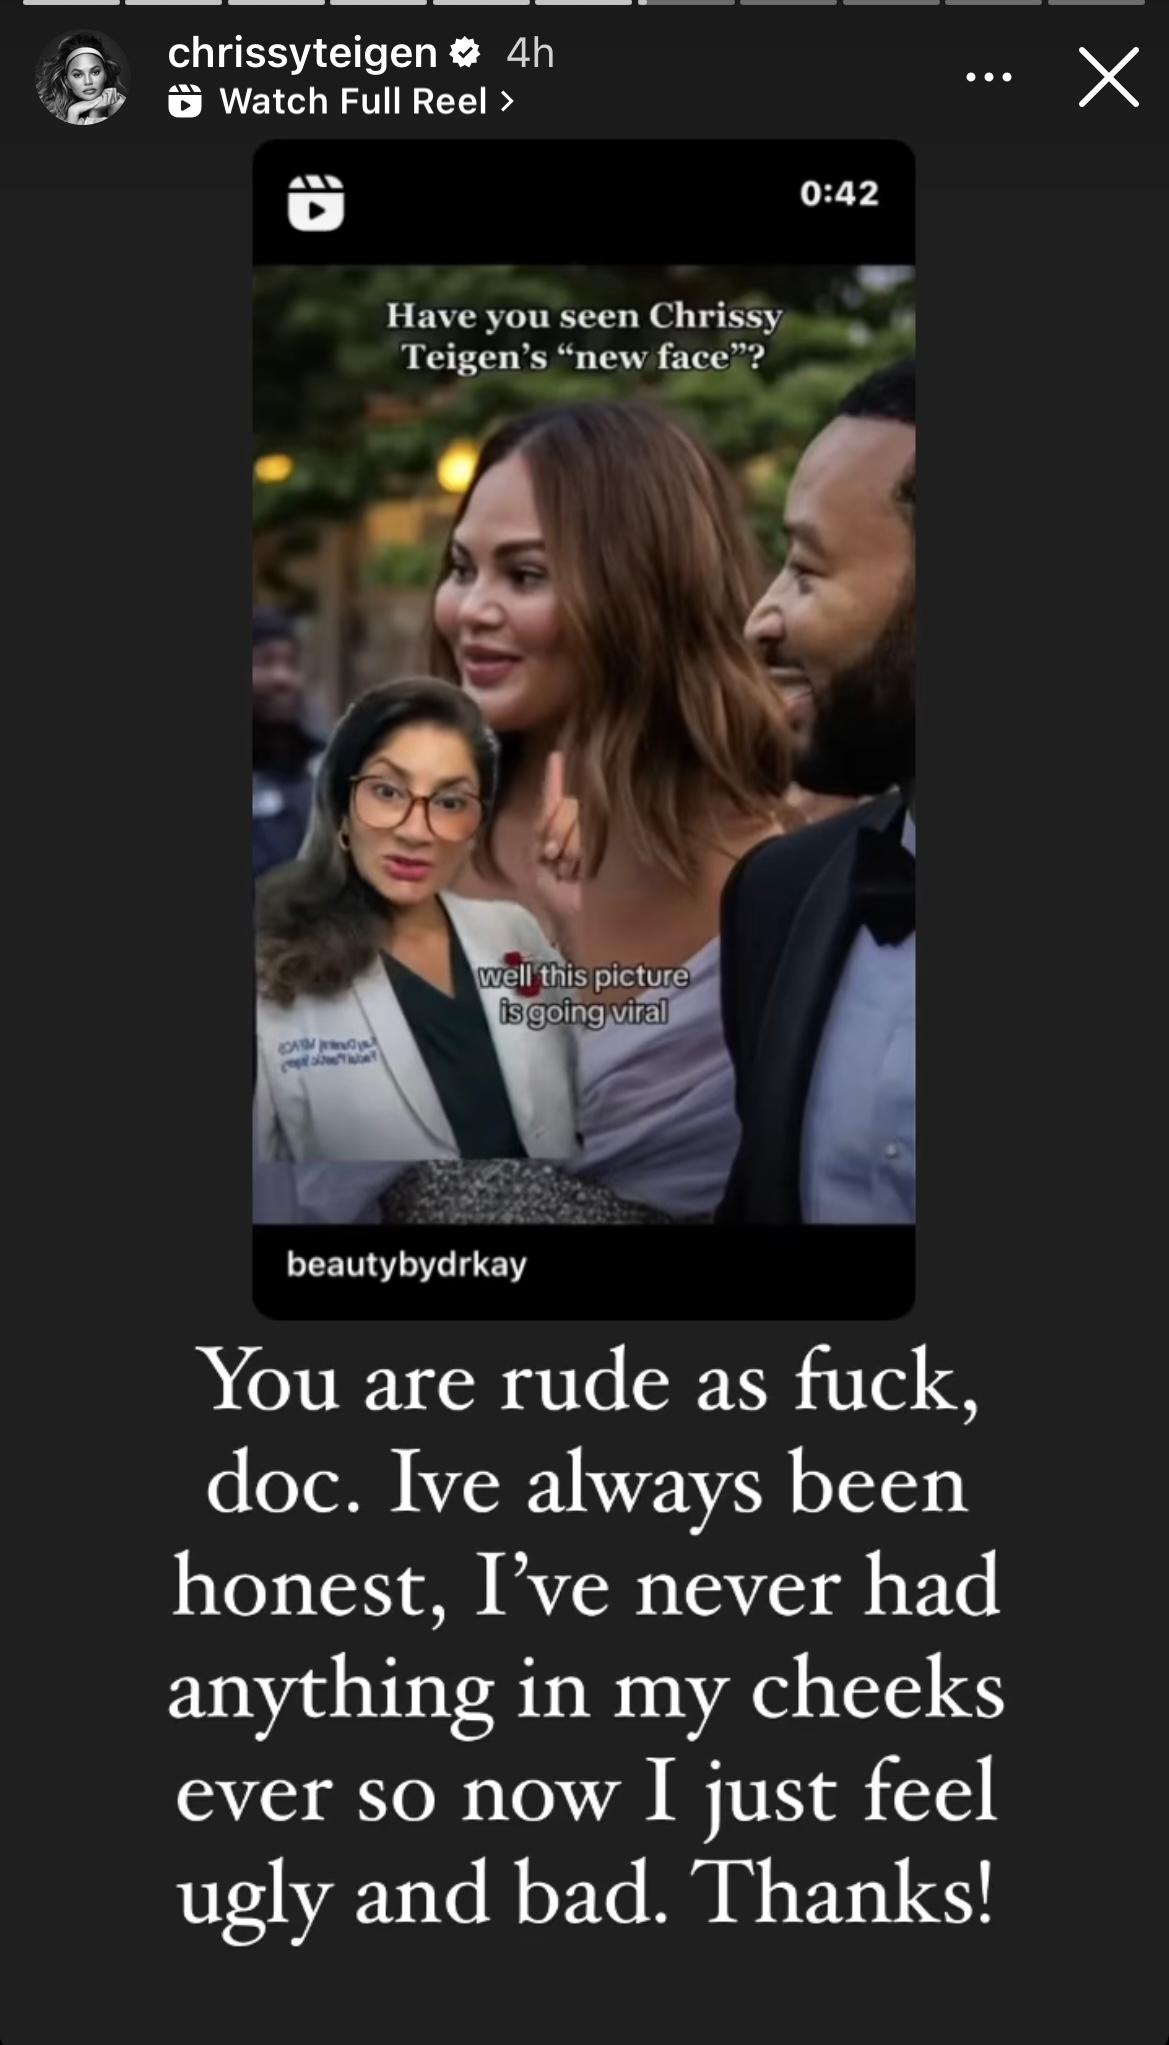 Chrissy Teigen Claps back at plastic surgeon who accused her of using cheek injectors